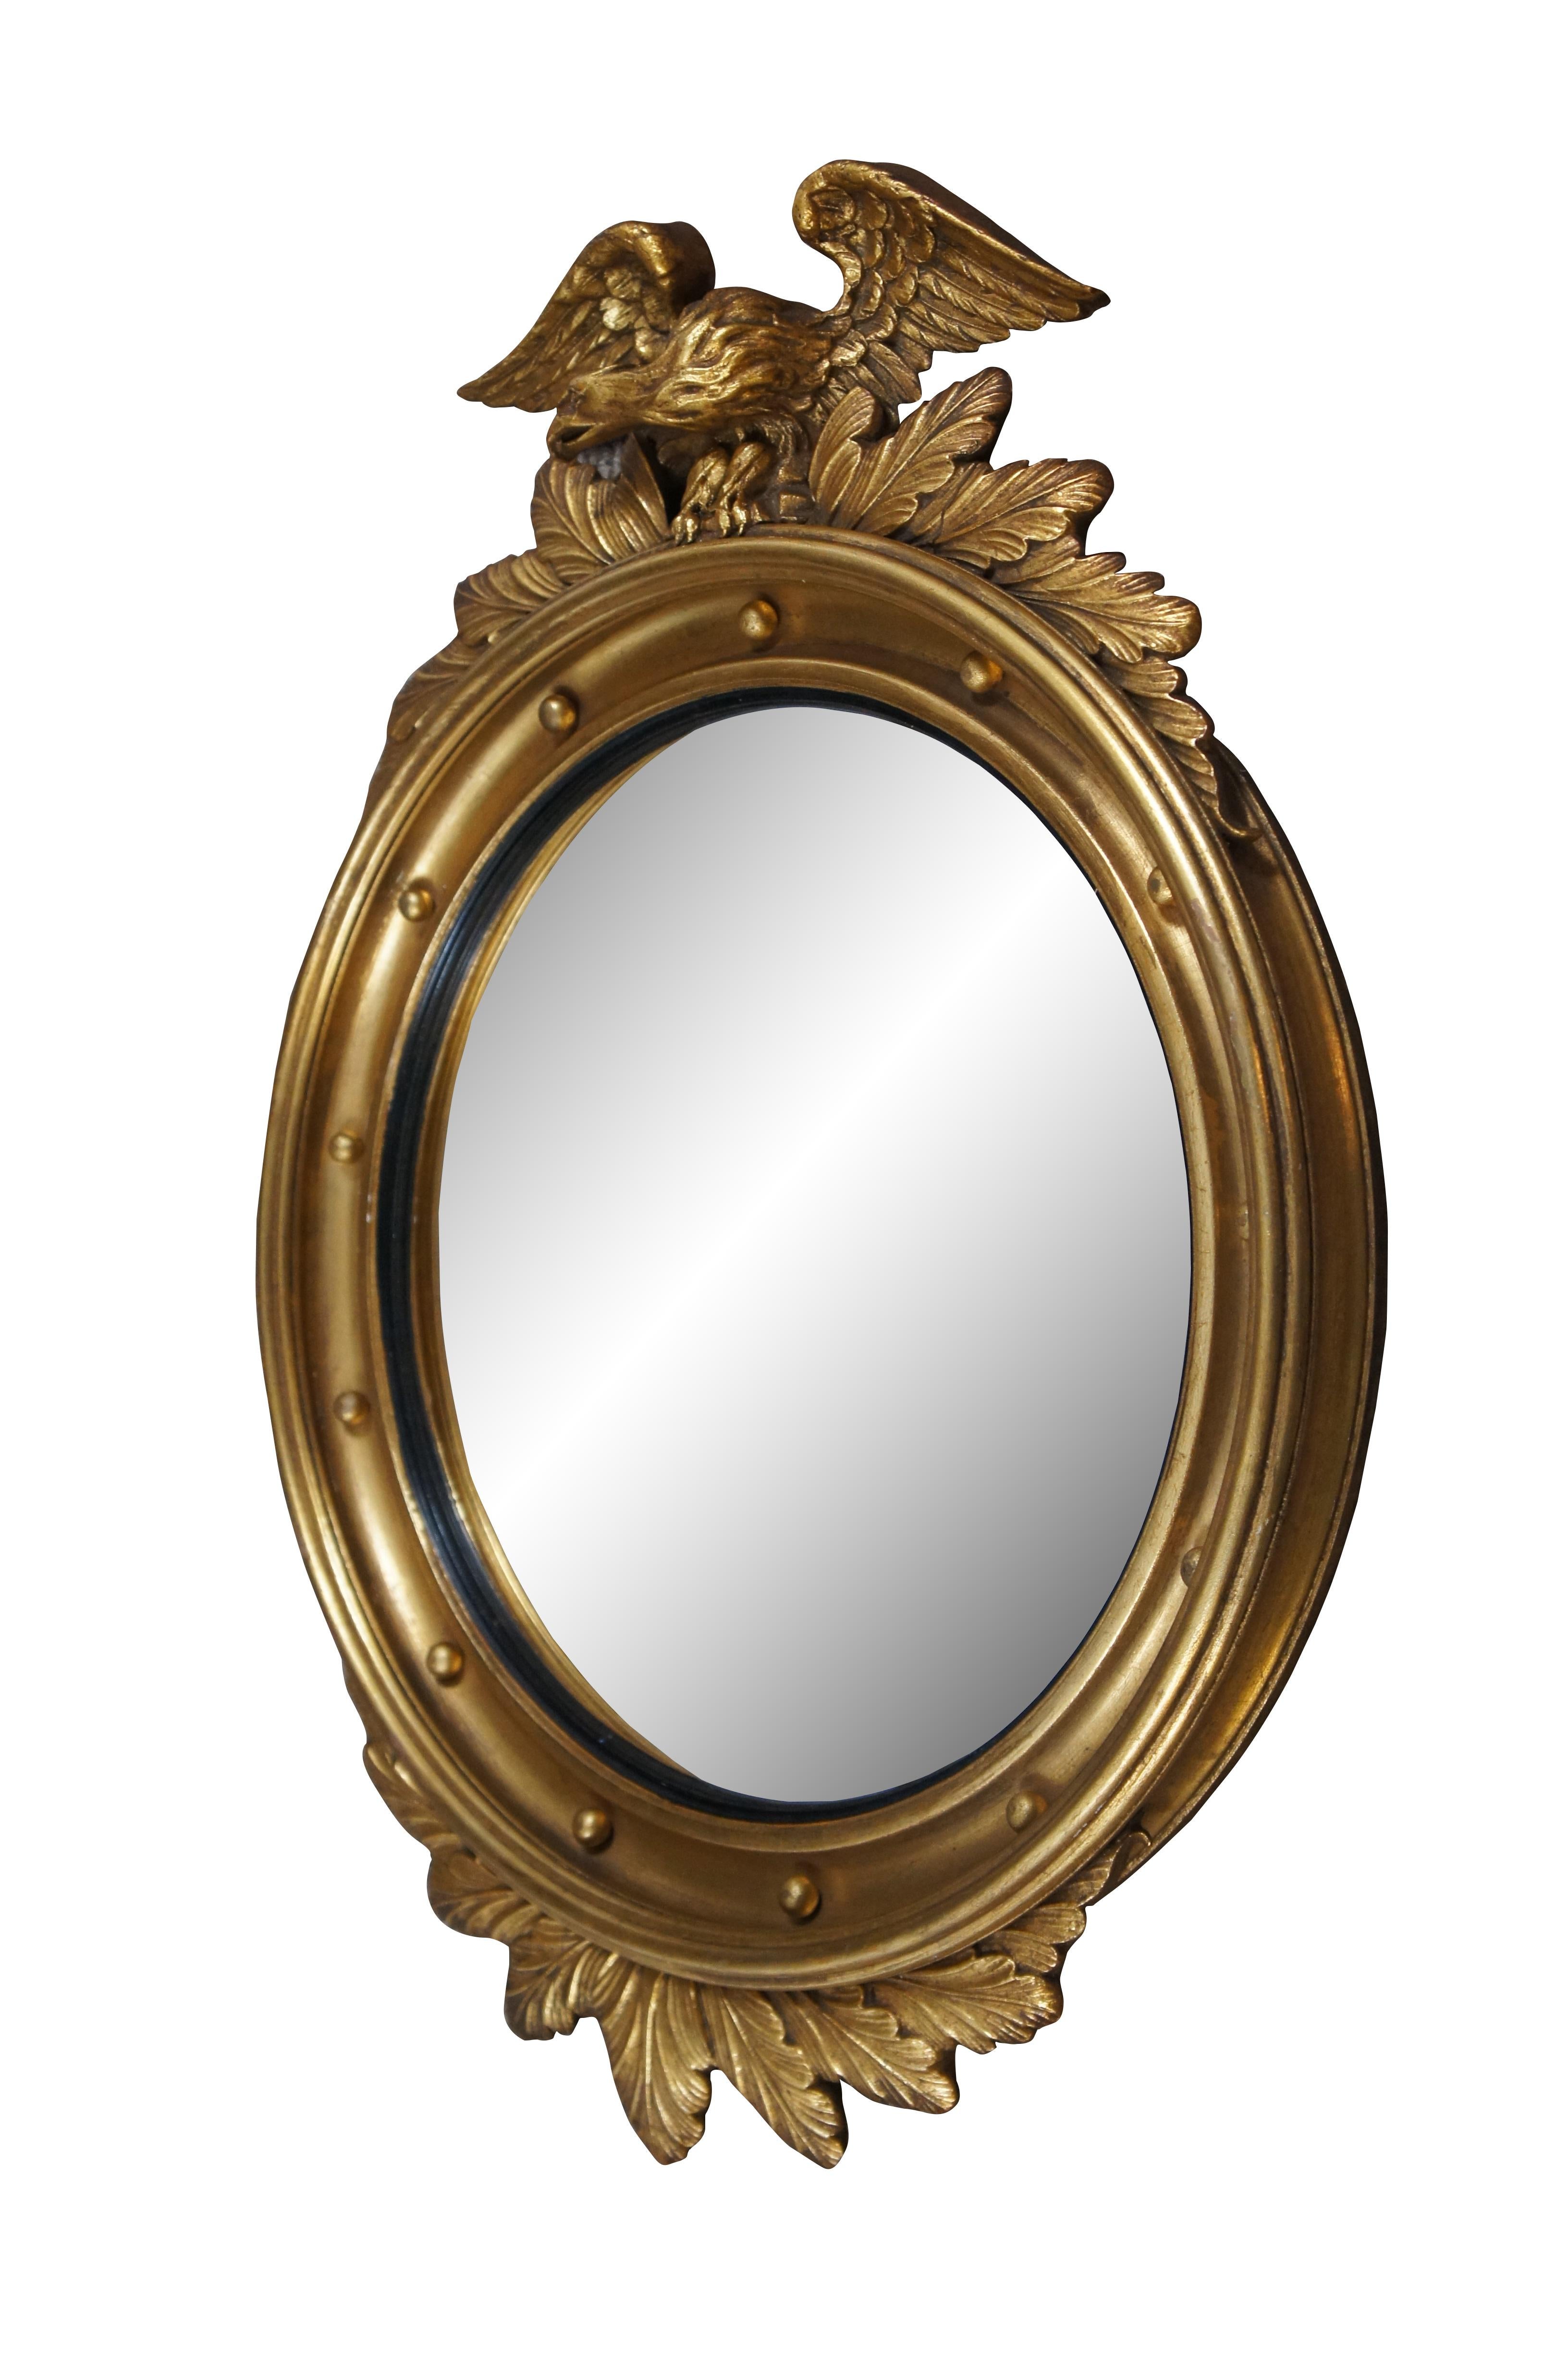 Antique 19th Century gold giltwood bullseye / convex wall mirror featuring a round frame carved with an American eagle with wings outstretched and bunches of acanthus leaves, over a beveled and braded frame with a black inner border around the